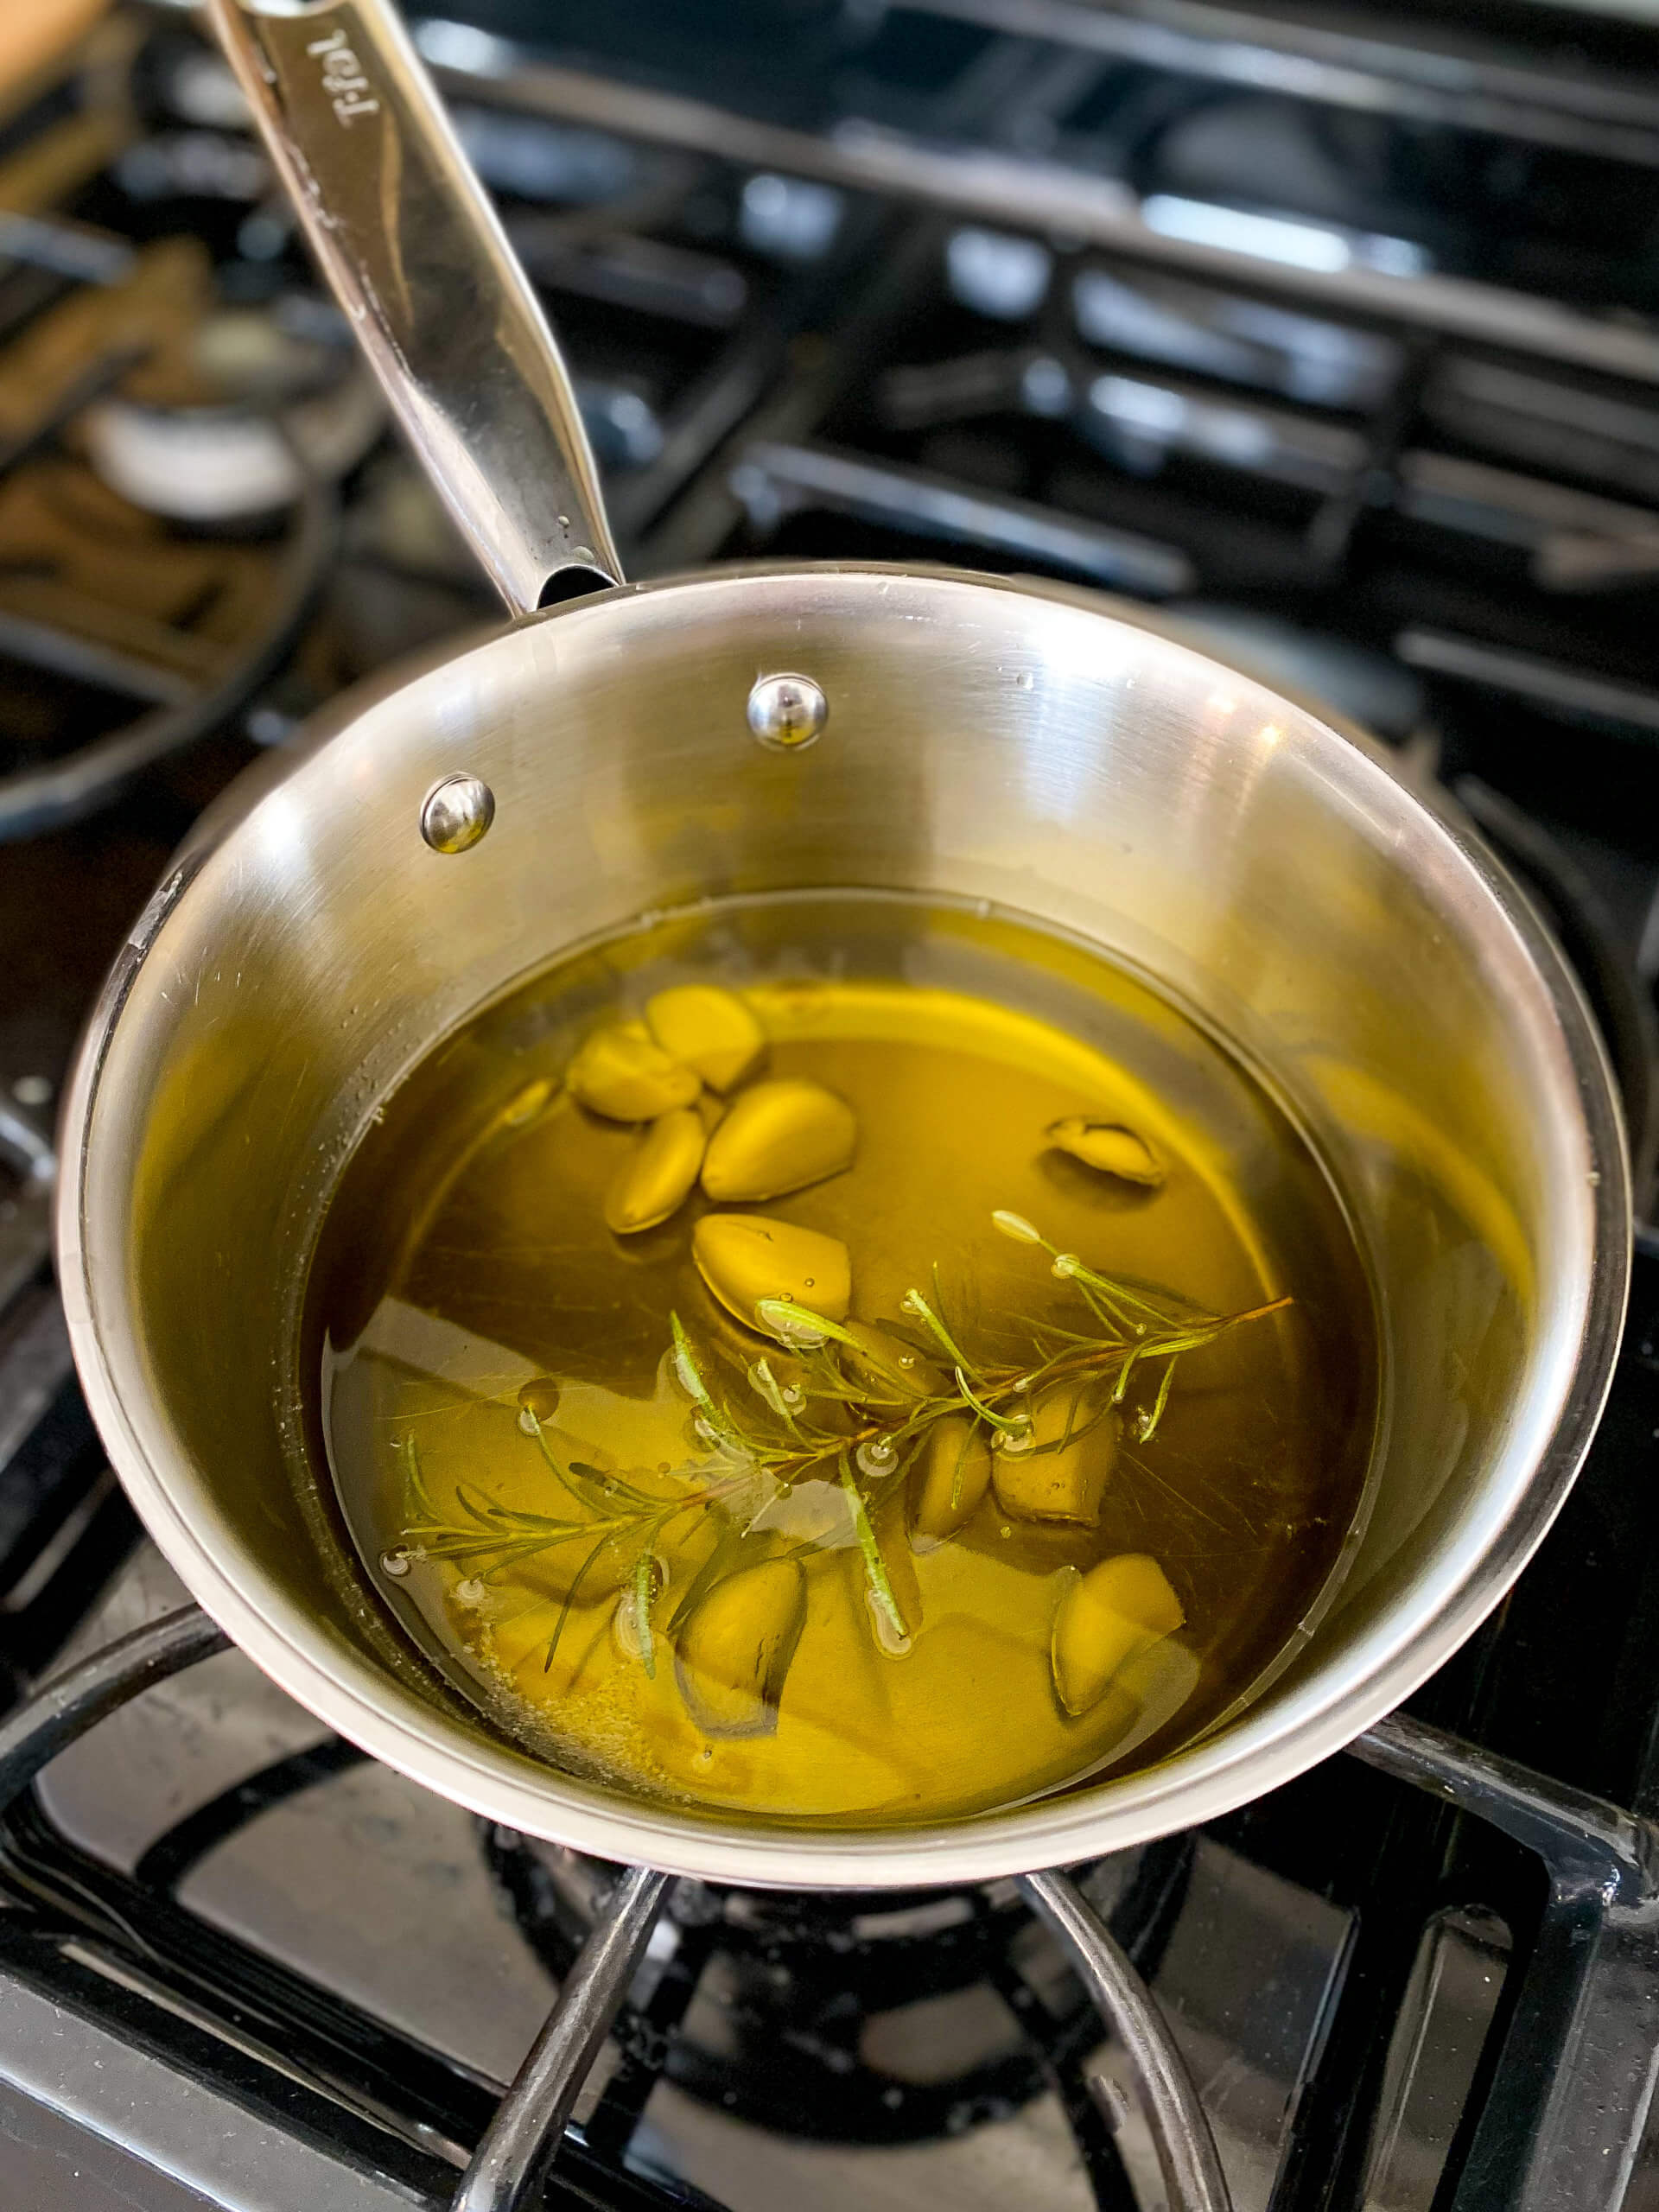 Garlic and Rosemary Infused Olive Oil